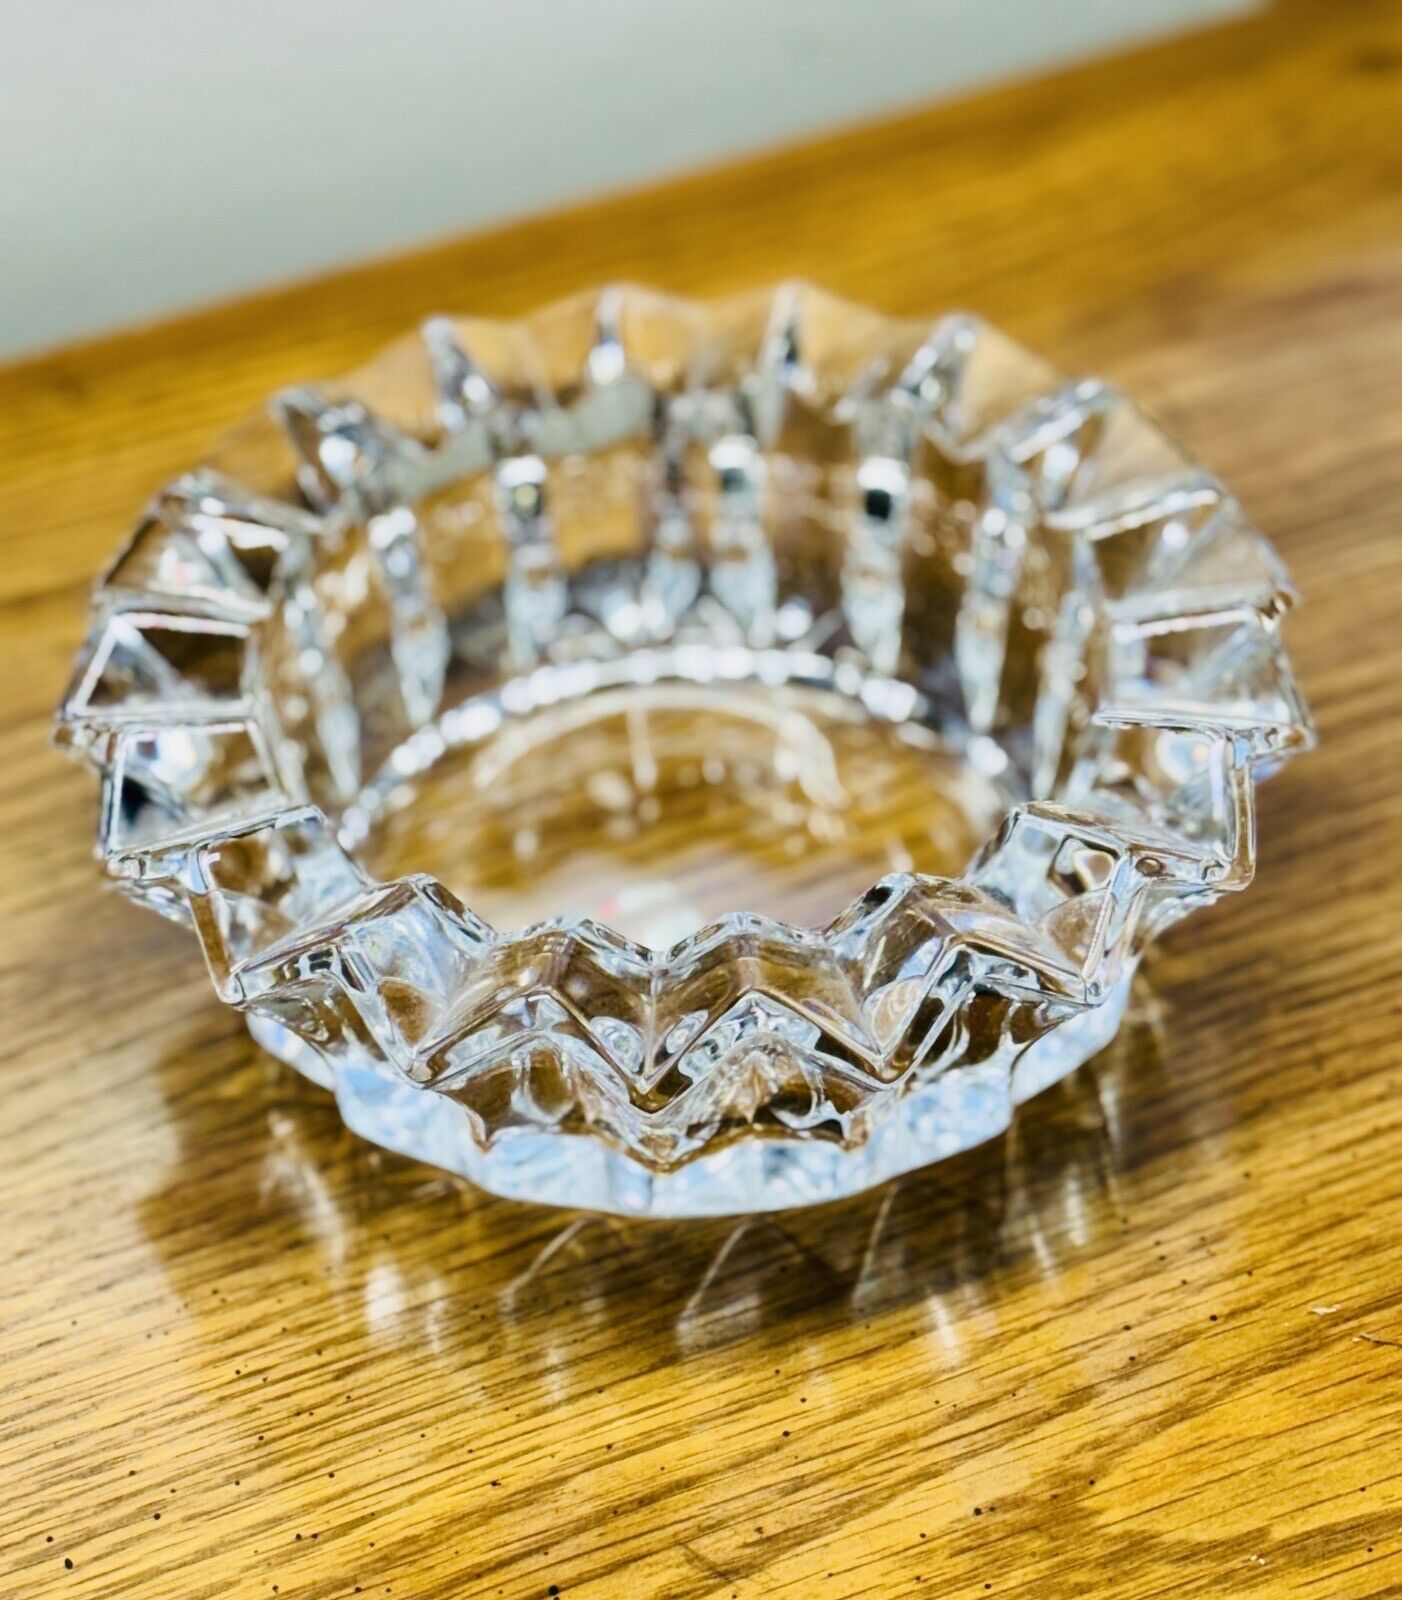 Vintage DANSK Crystal Heavy, Art Deco Style Ashtray or Candy Dish